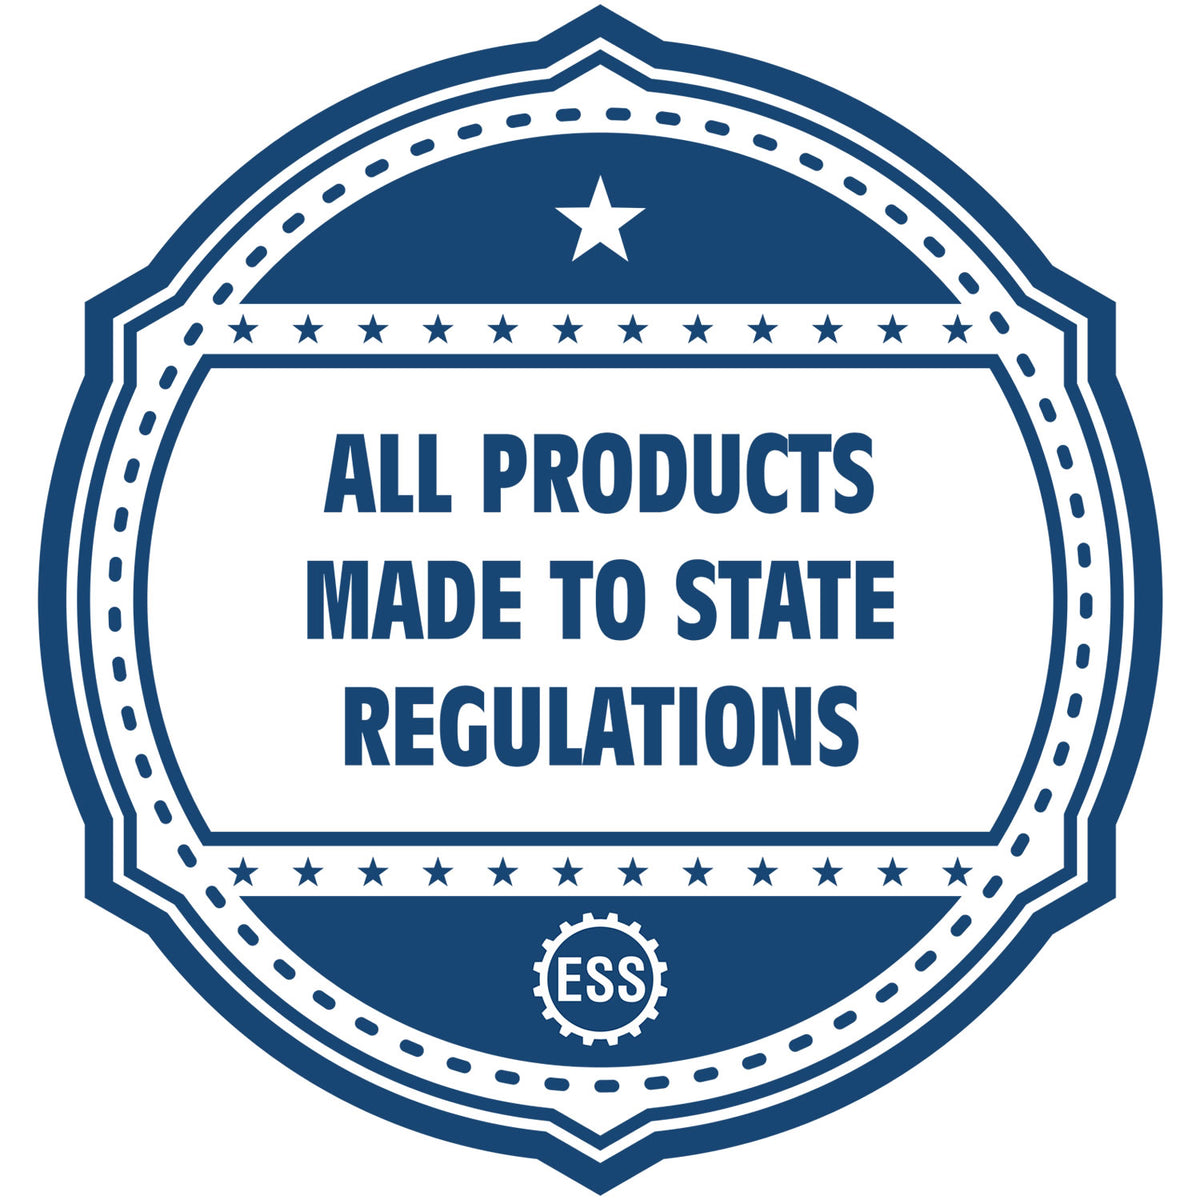 An icon or badge element for the Super Slim Virginia Notary Public Stamp showing that this product is made in compliance with state regulations.